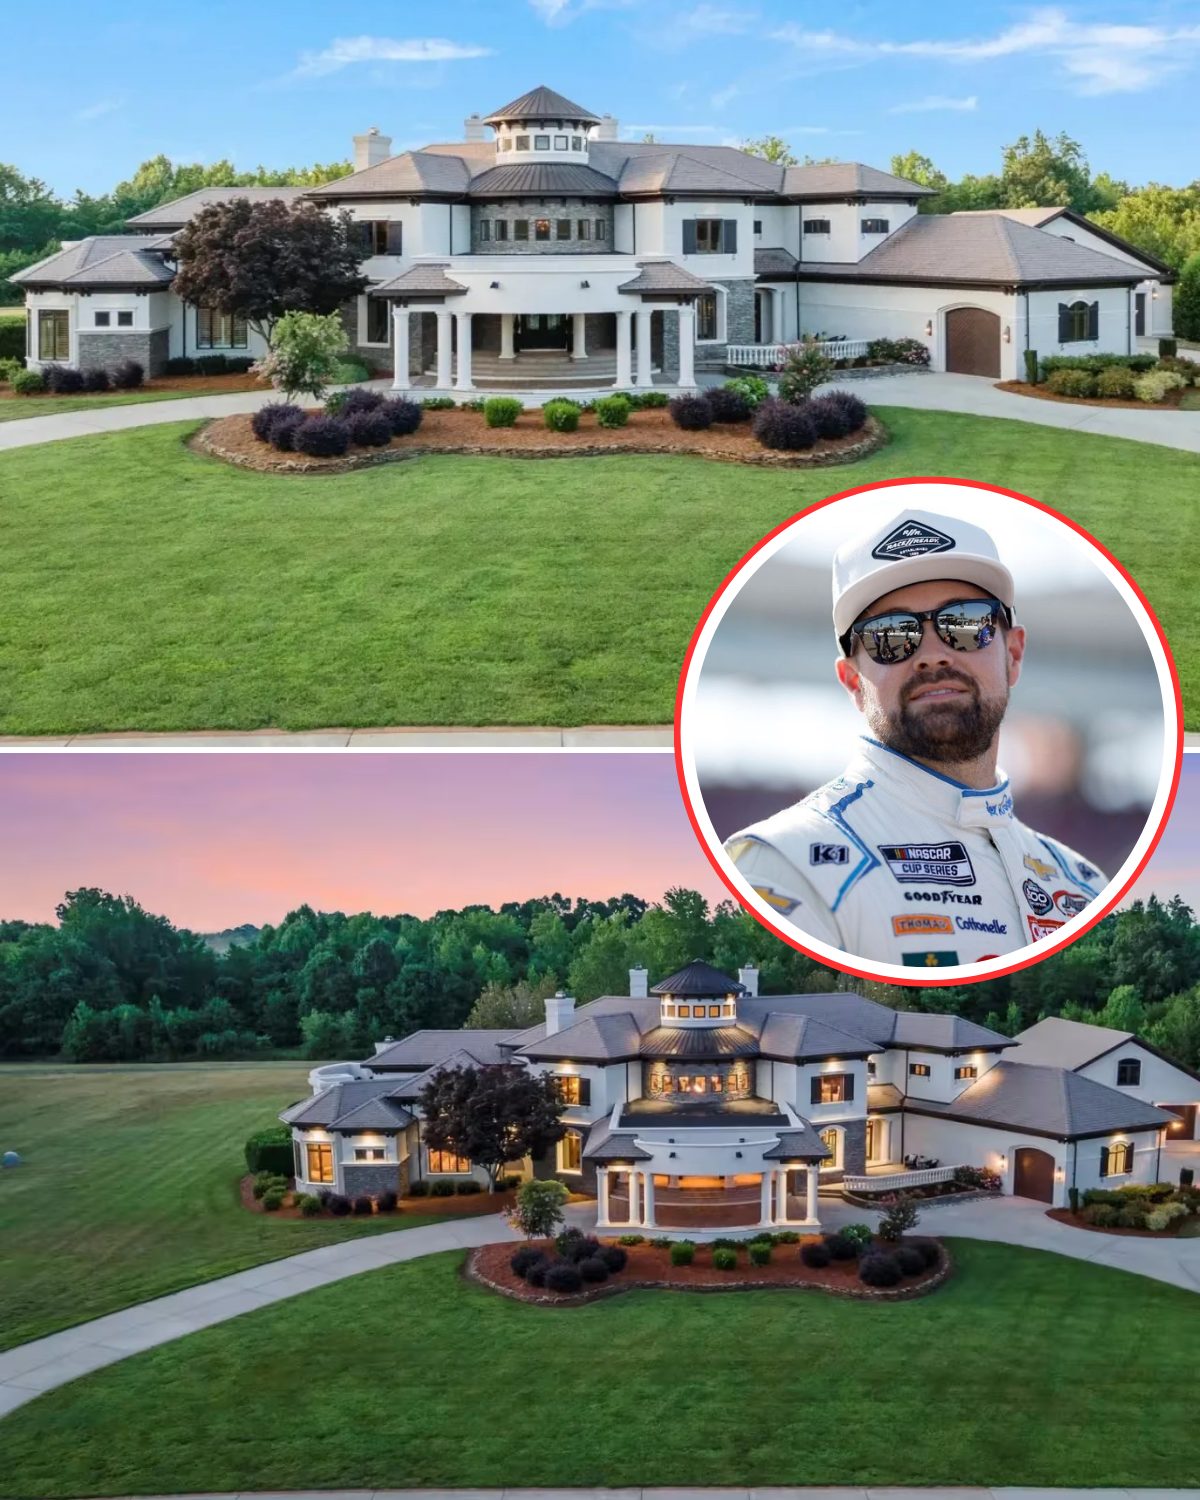 Cover Image for Star of NASCAR, Ricky Stenhouse Jr. owns the opulent $16 million estate in North Carolina, which features equestrian amenities and a two-story infinity-edge pool